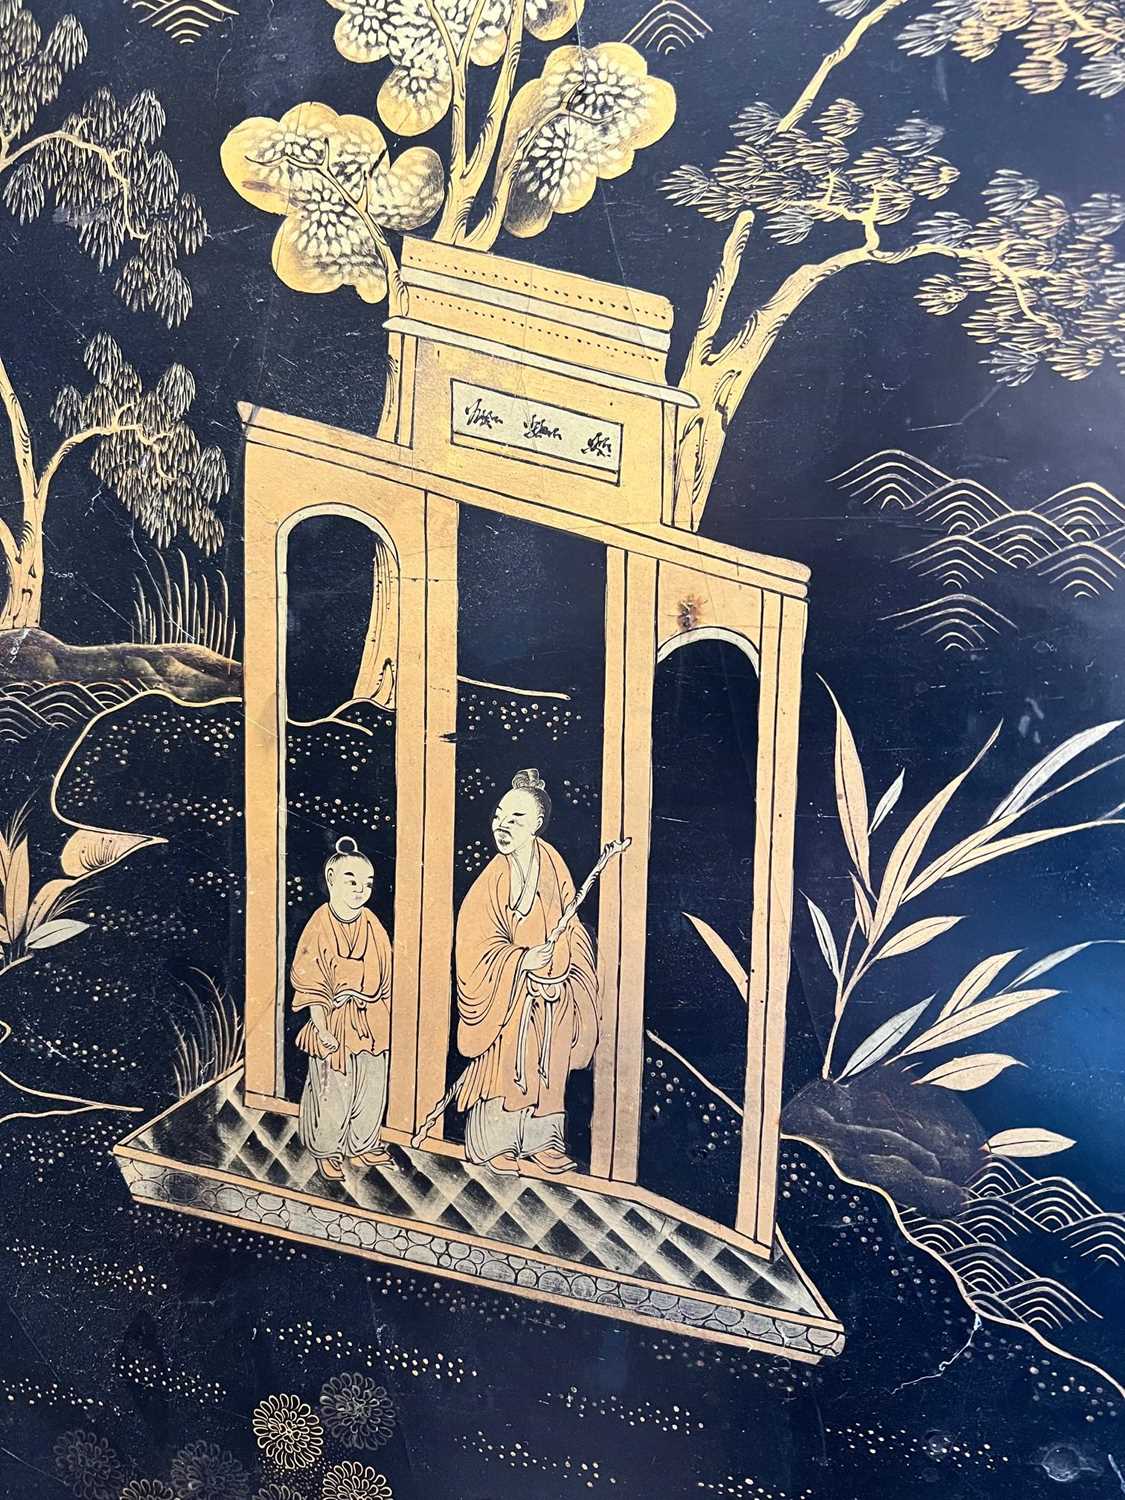 A LATE 18TH / EARLY 19TH CENTURY CHINESE BLACK LACQUERED, SILVER AND GILT DECORATED SCREEN - Image 9 of 9